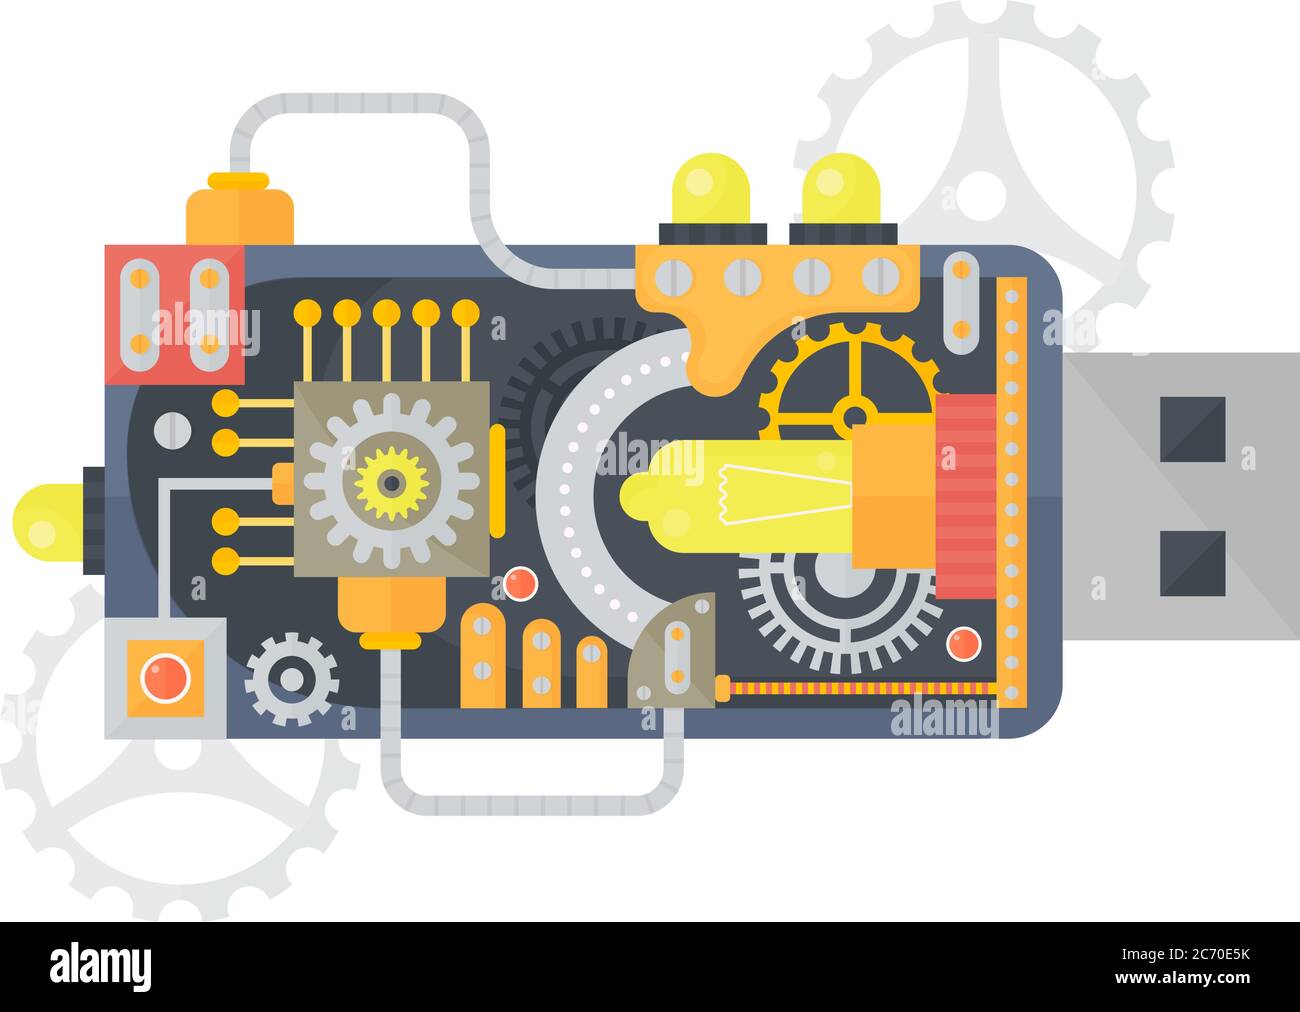 Vector illustration of USB flash drive with different small gears and lamps inside Stock Vector